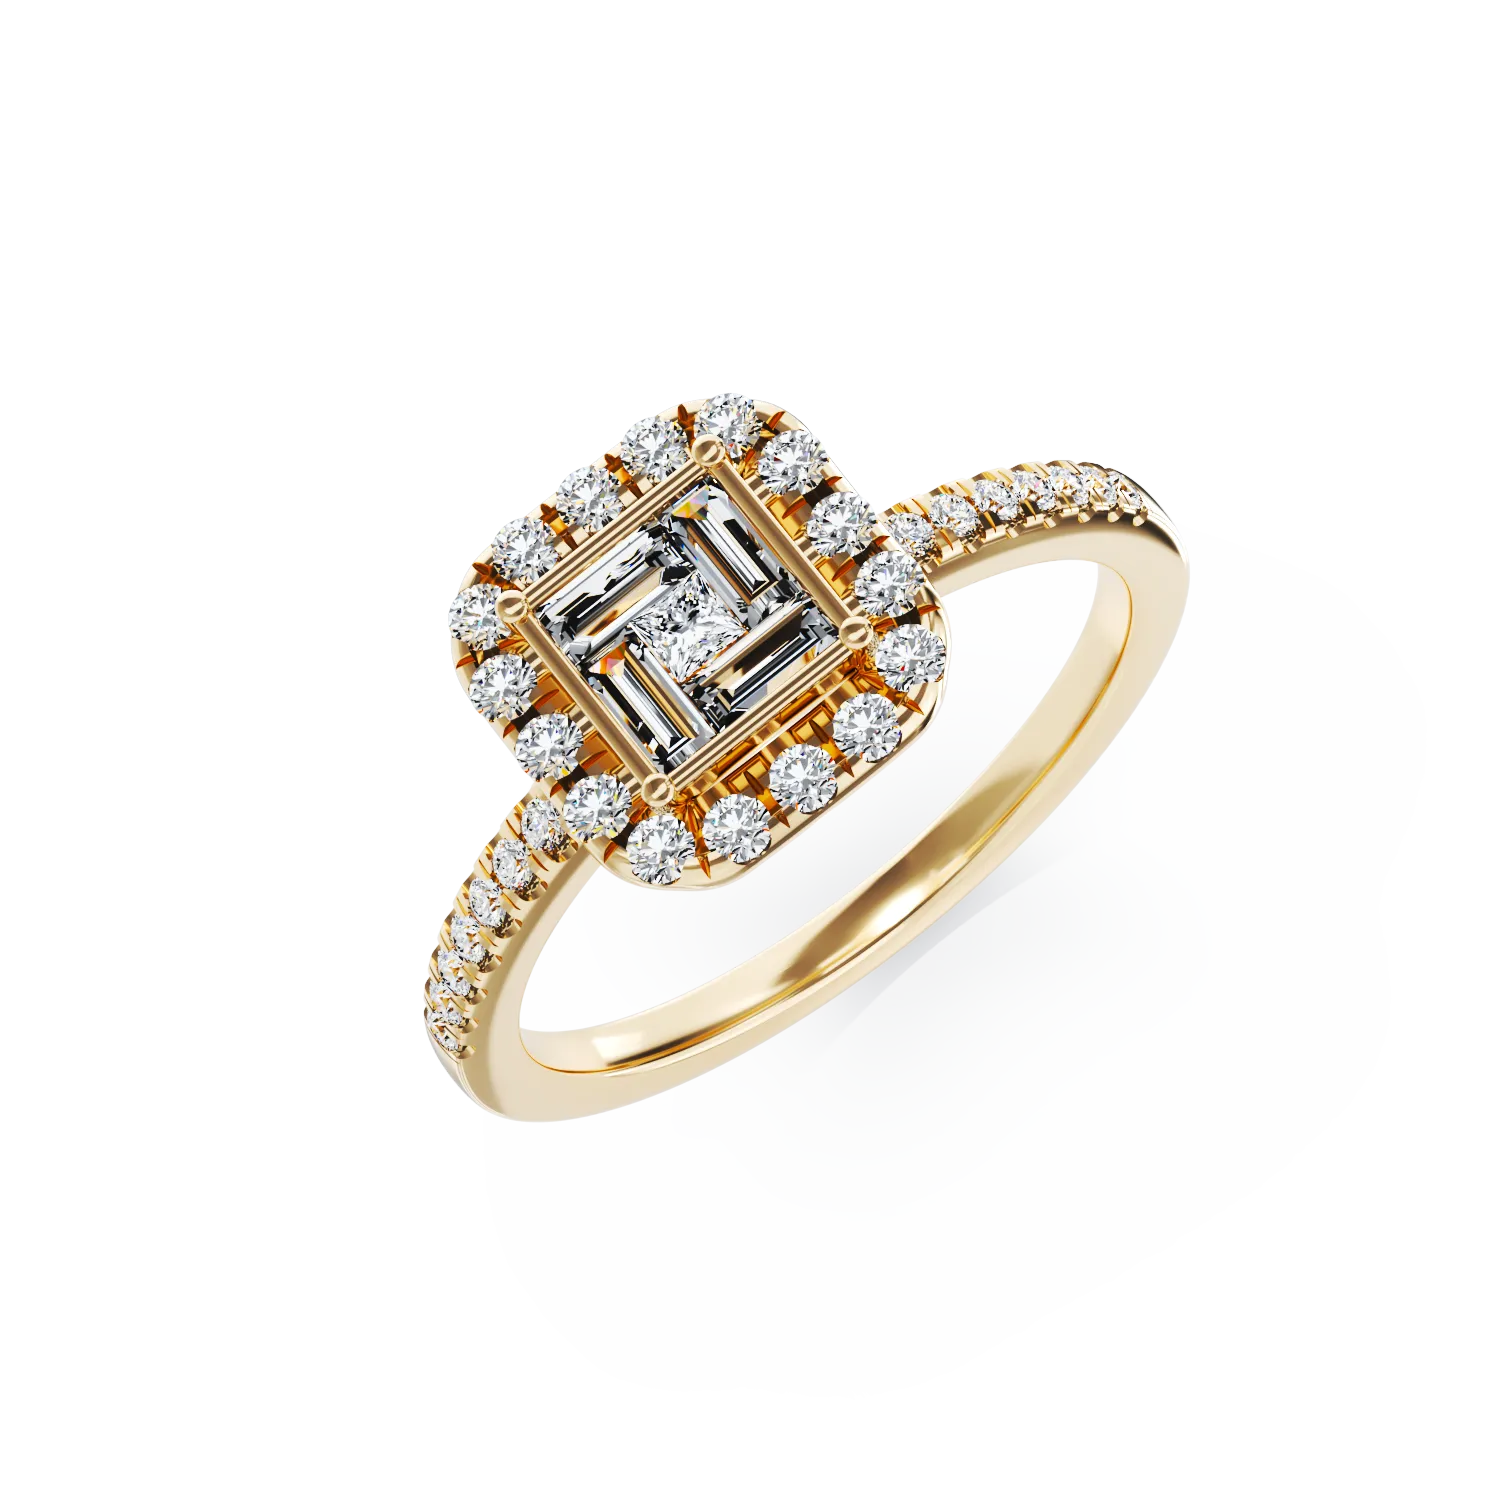 18K yellow gold engagement ring with 0.46ct diamonds